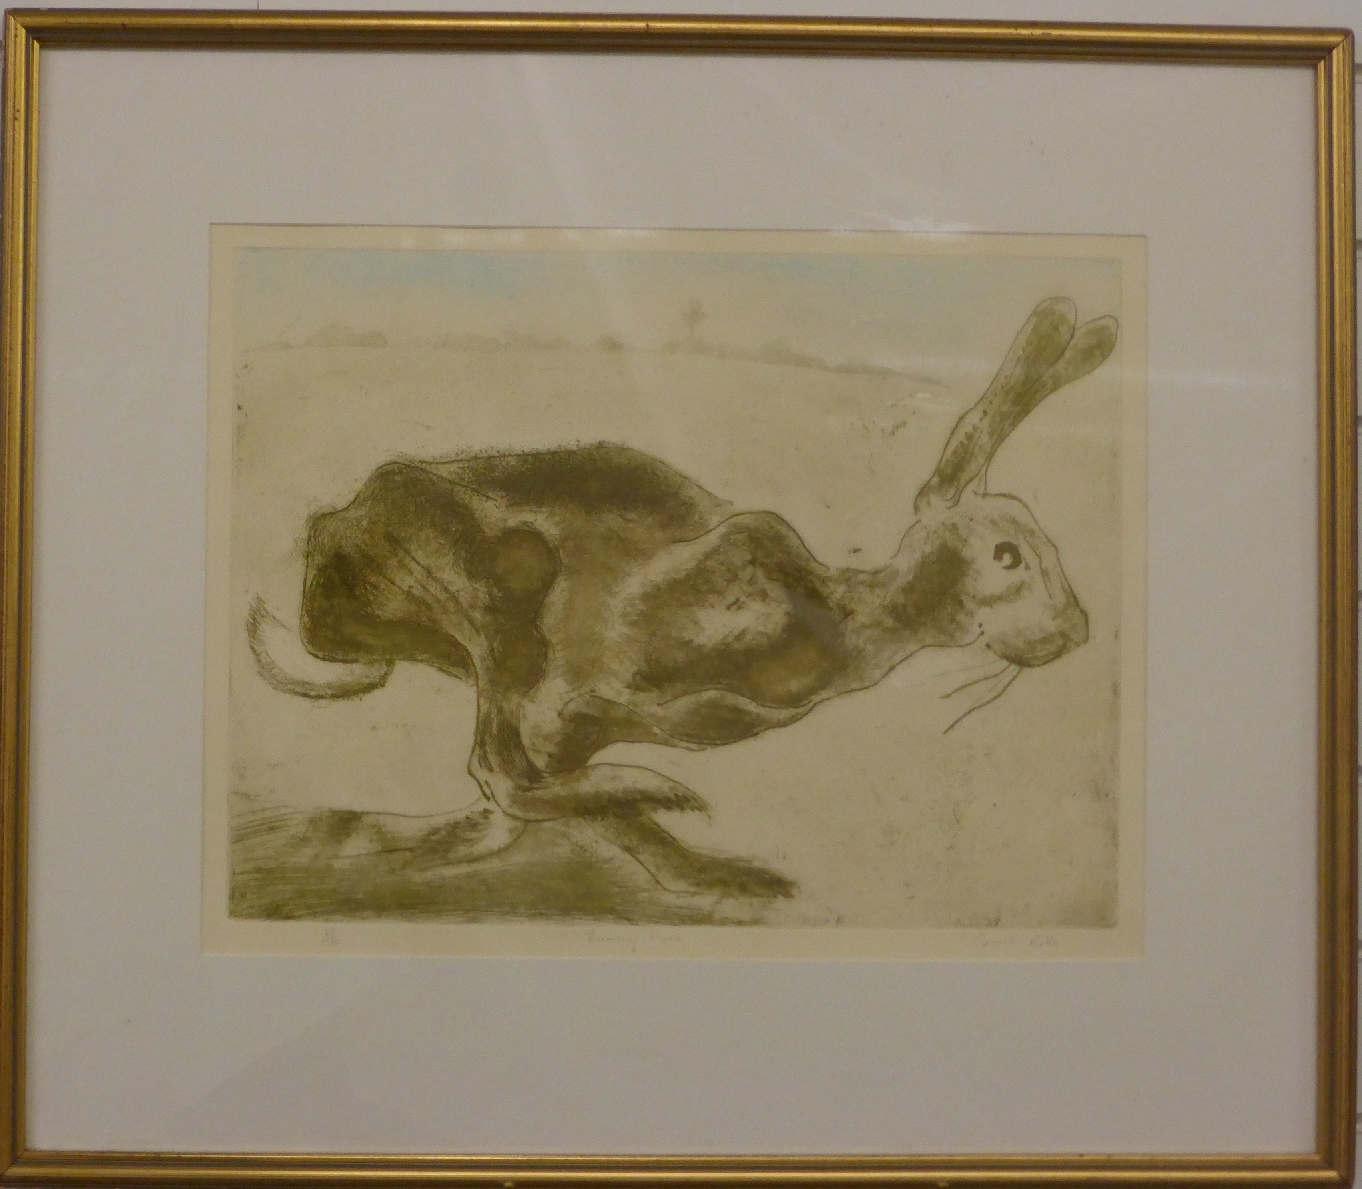 Sonia Rollo signed limited edition (47/100) print Running Hare, 40 x 52cm